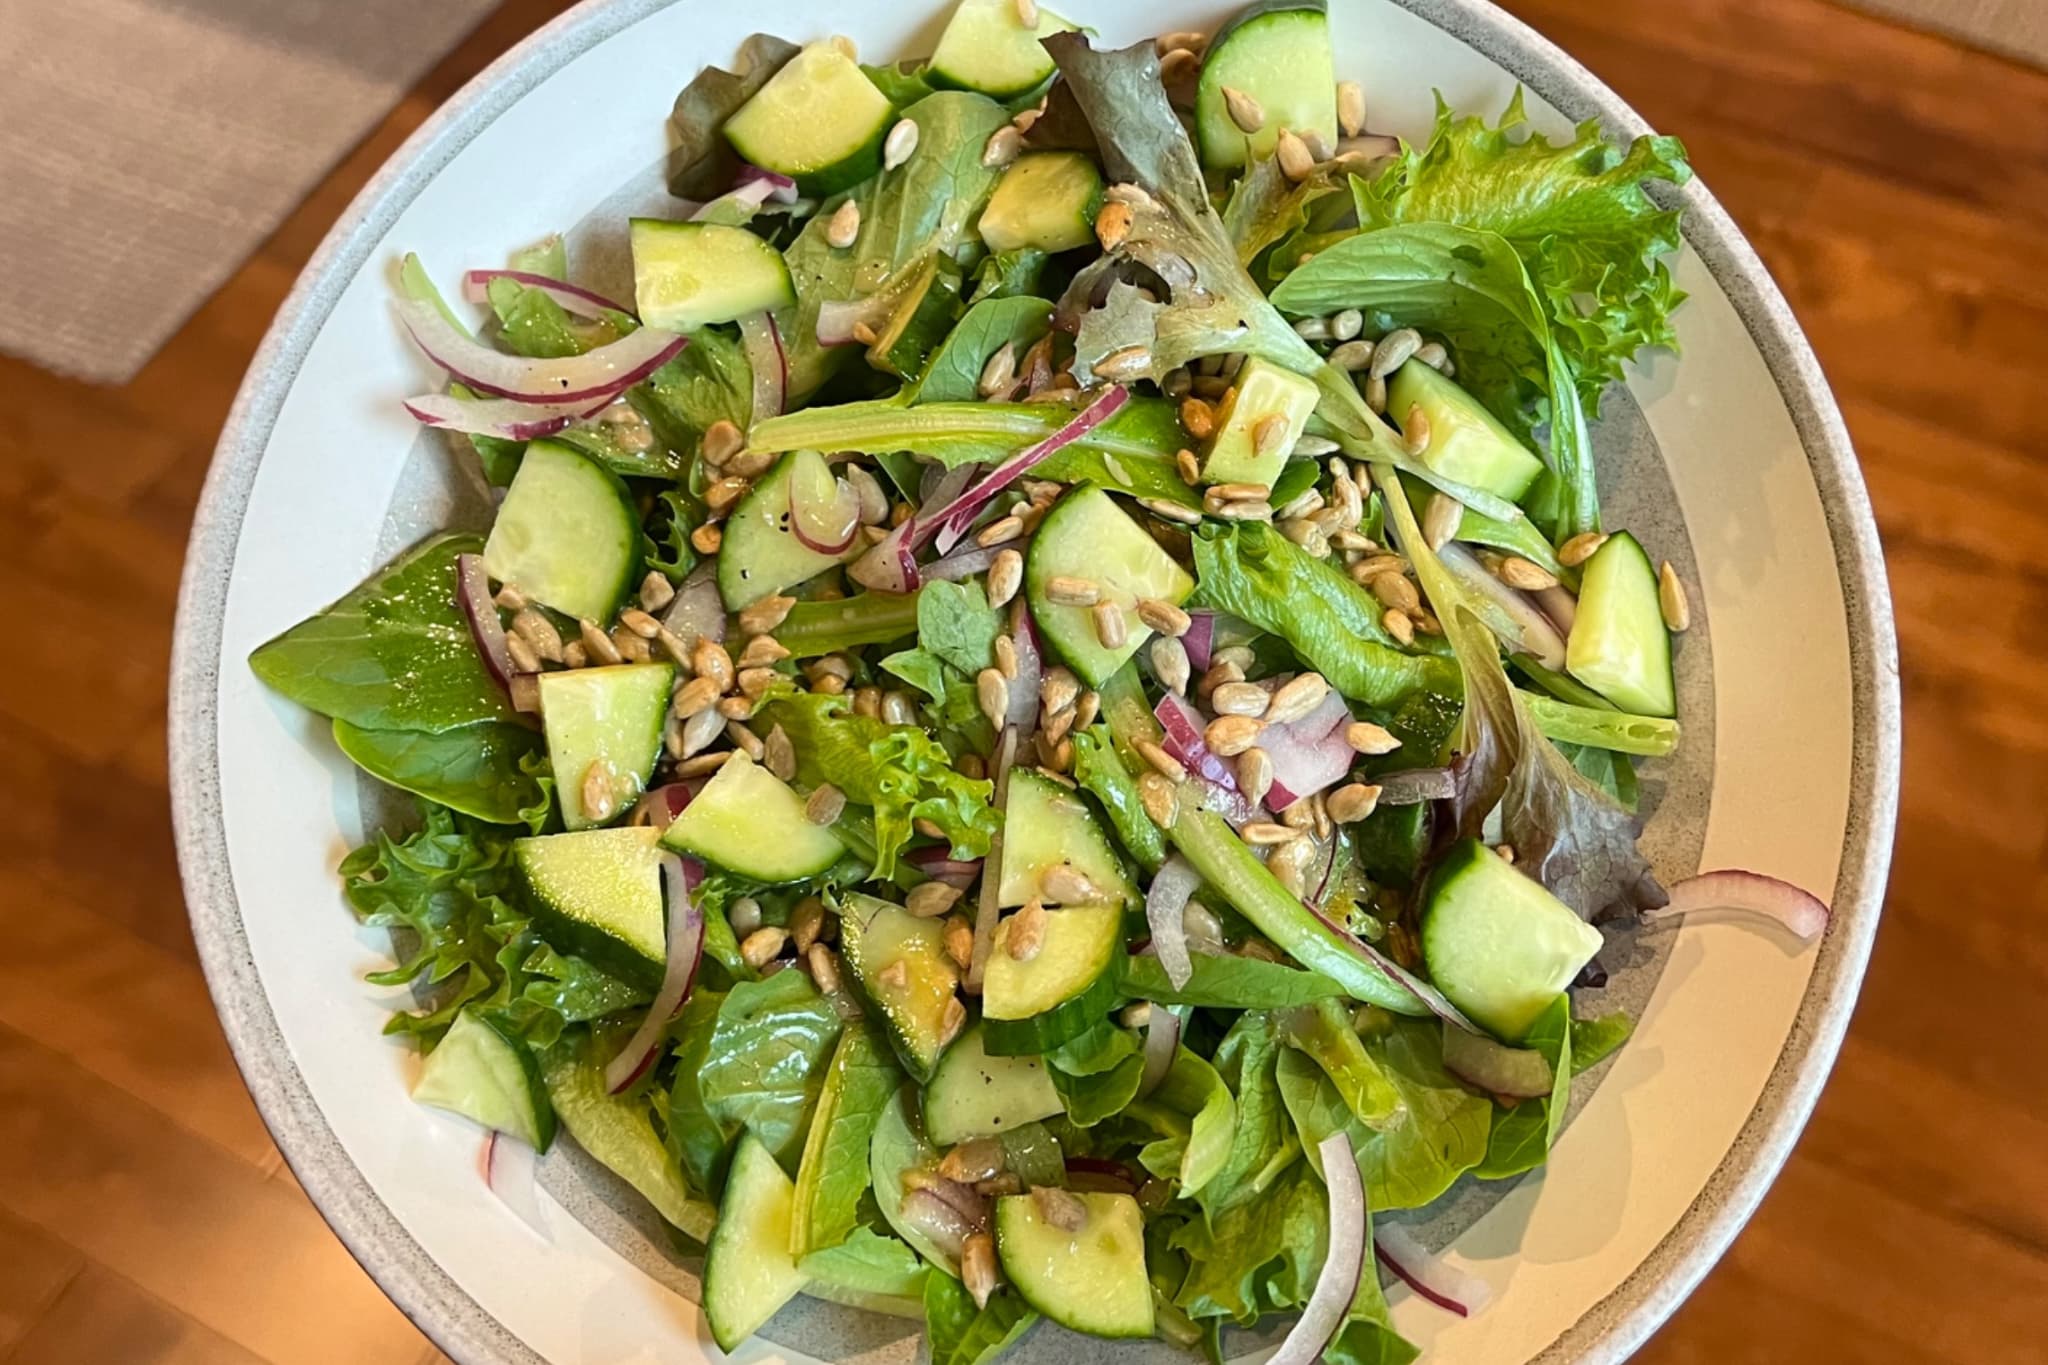 Mixed Green Salad: A Simple and Healthy Meal Choice - Home. Made. Interest.